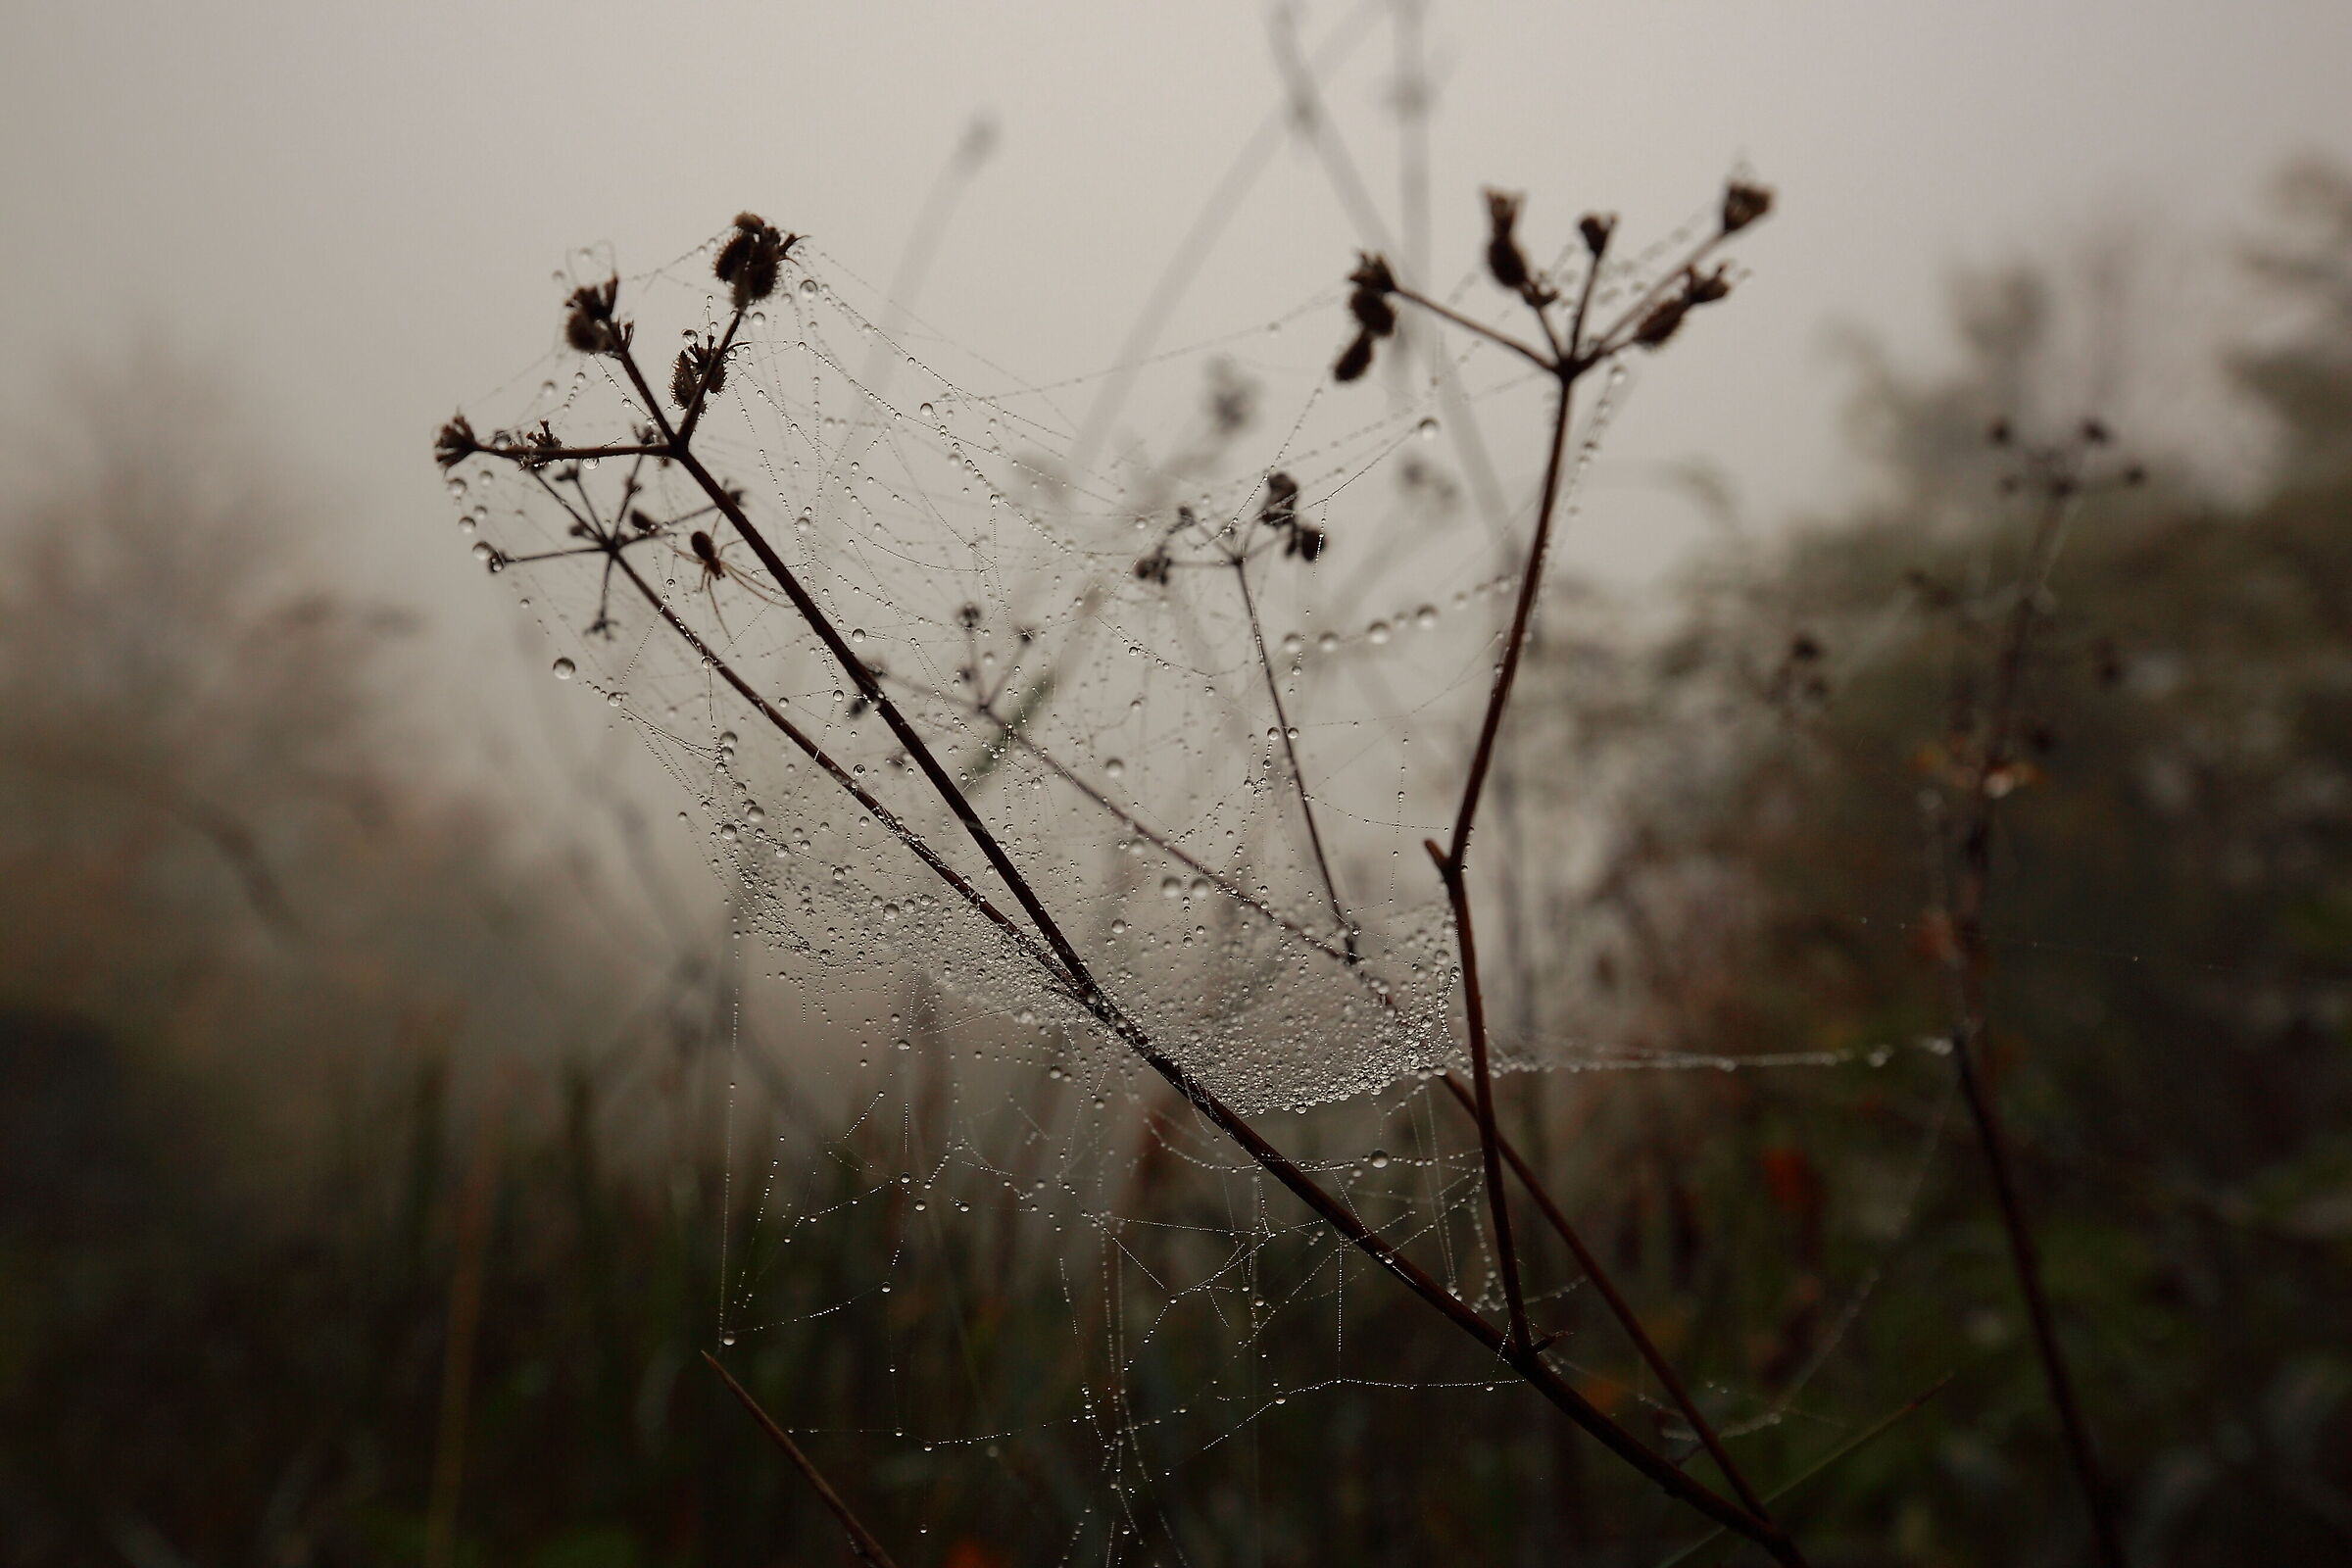 There is life in the spider's web ...